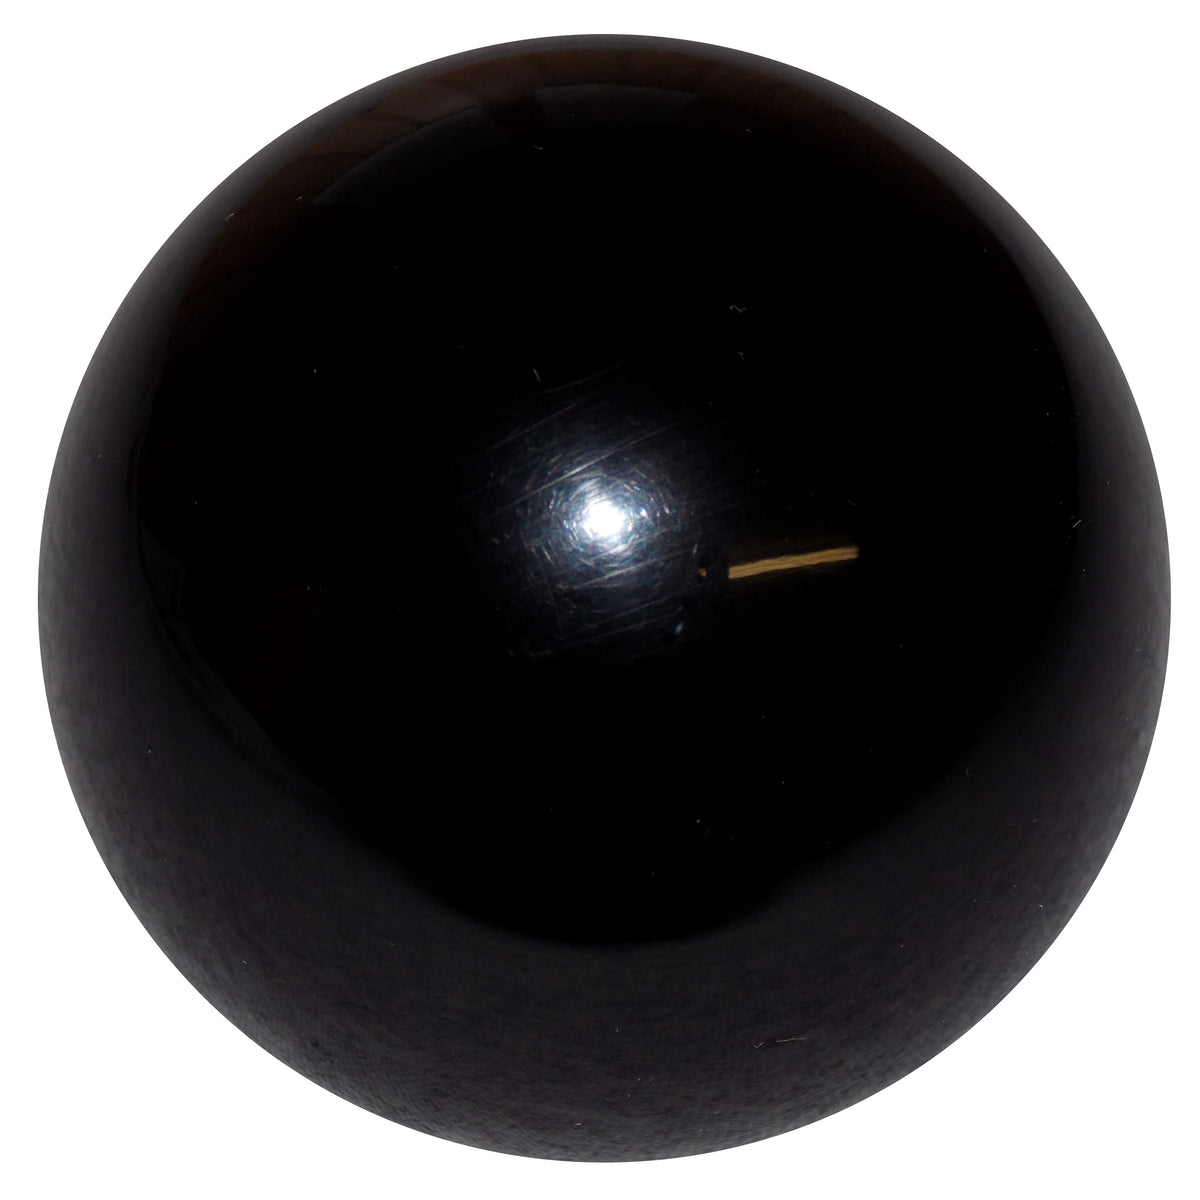 Black Loader control knob for compact Tractors, M10-1.50 threads